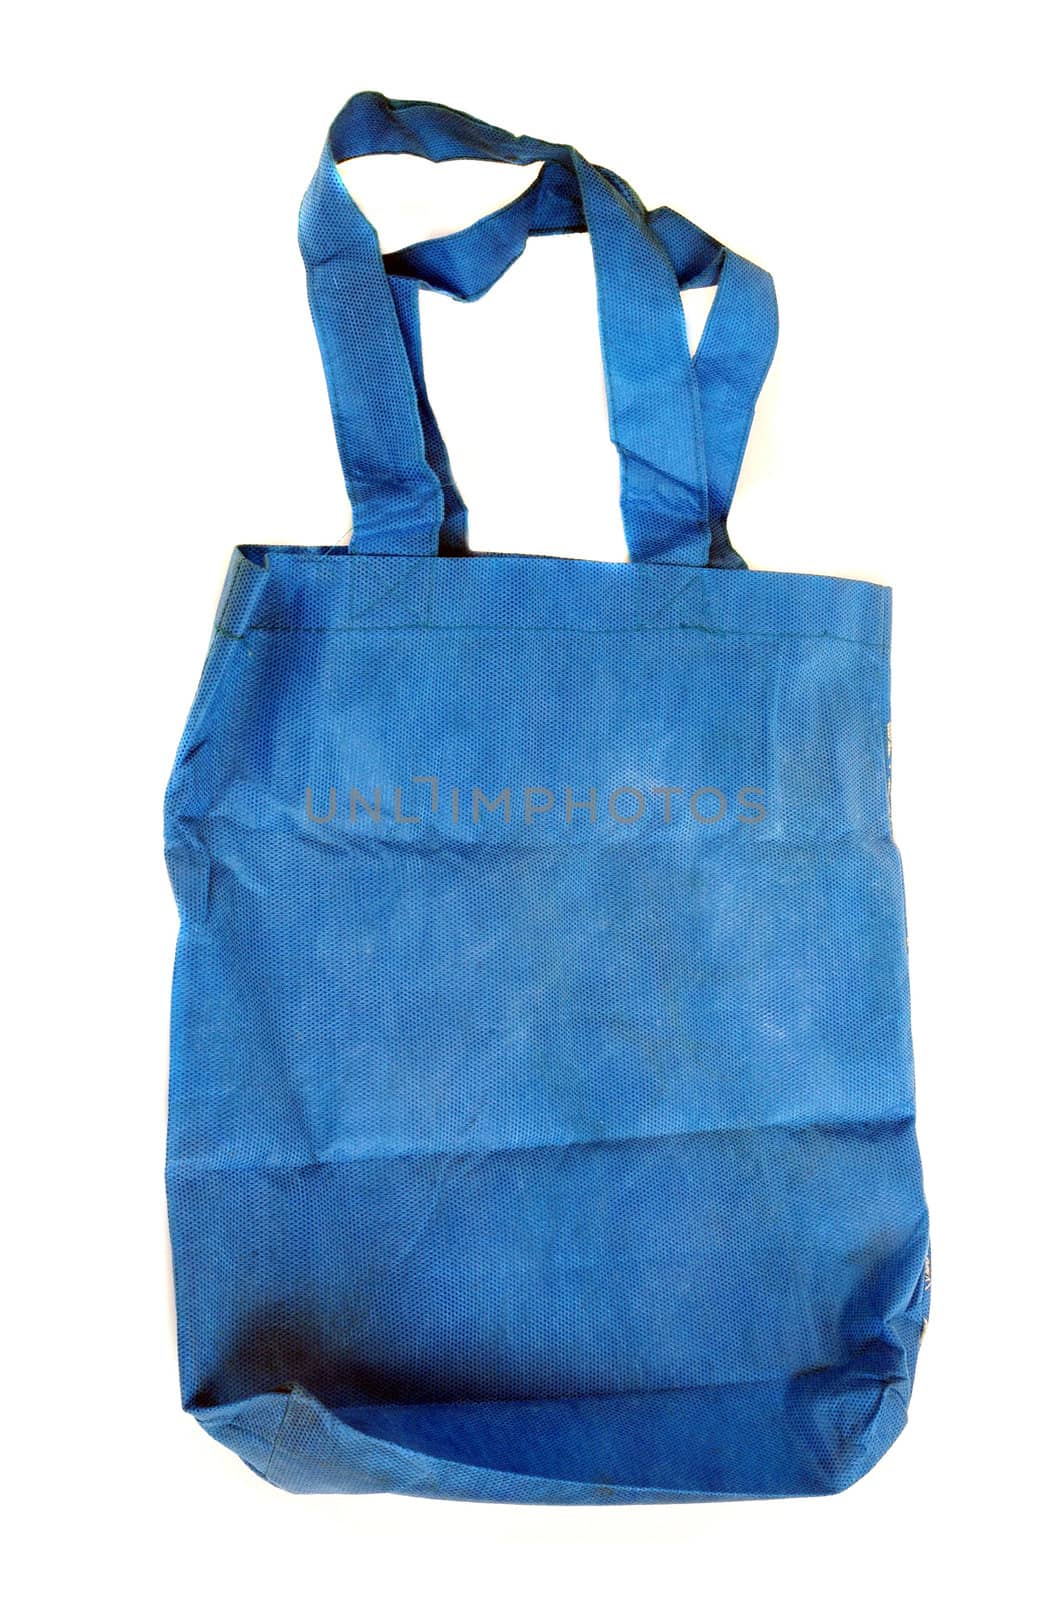 a blue cotton bag isolated on white background